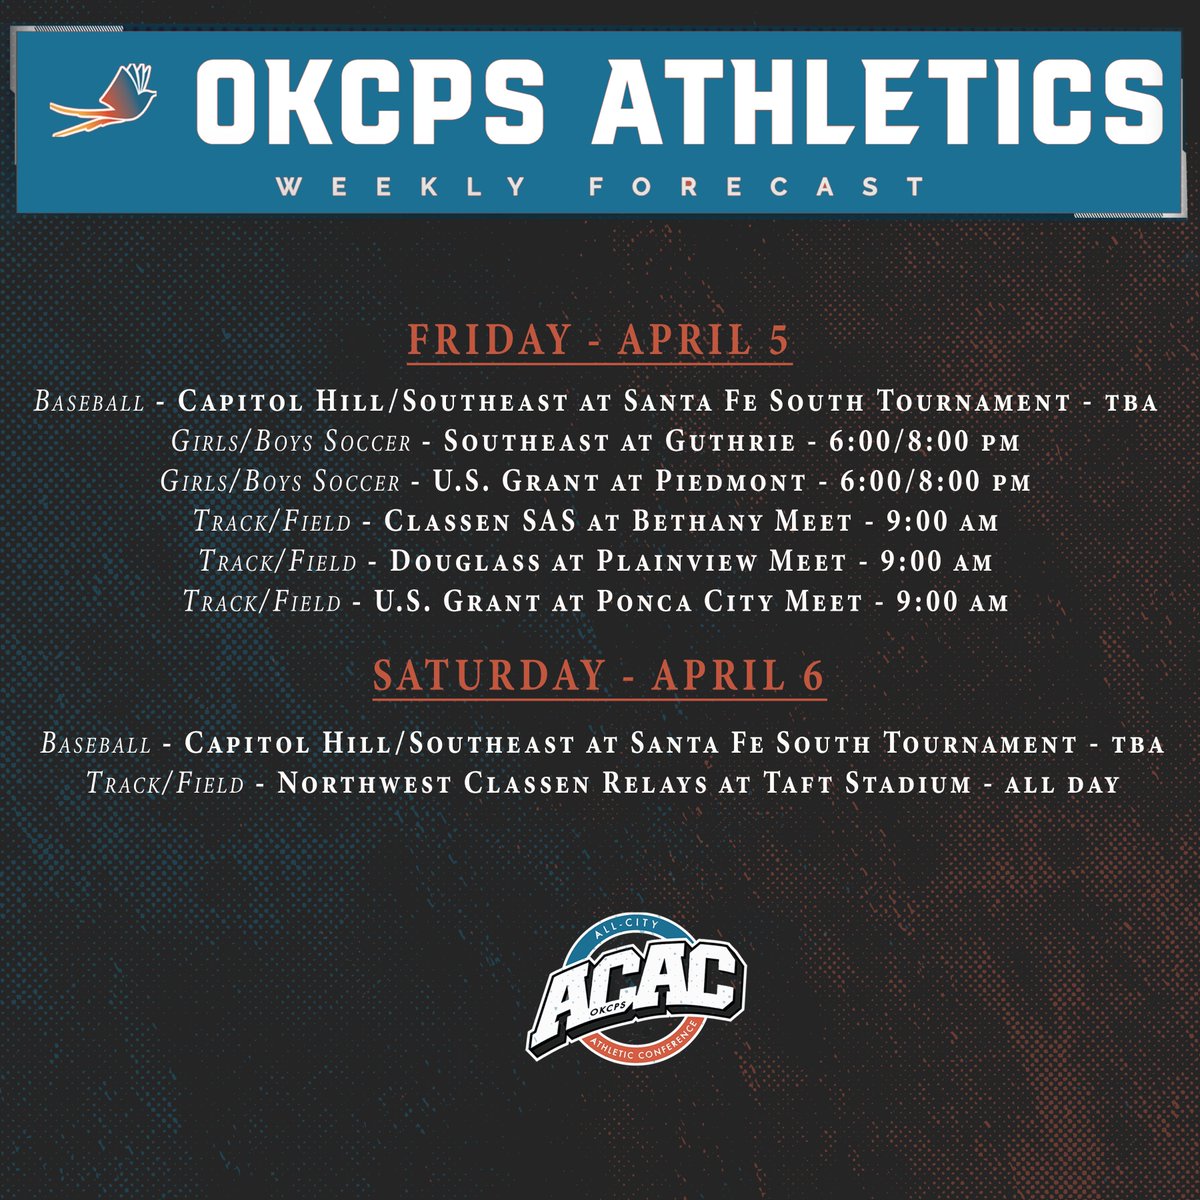 Kicking off April with some BIG events happening in the 405 👀 ➡️ ACAC Track - Wednesday ➡️ ACAC Tennis - Friday ➡️ Baseball / Soccer / Golf all in action Here's the full @OKCPS 𝙒𝙚𝙚𝙠𝙡𝙮 𝙁𝙤𝙧𝙚𝙘𝙖𝙨𝙩 ⬇️